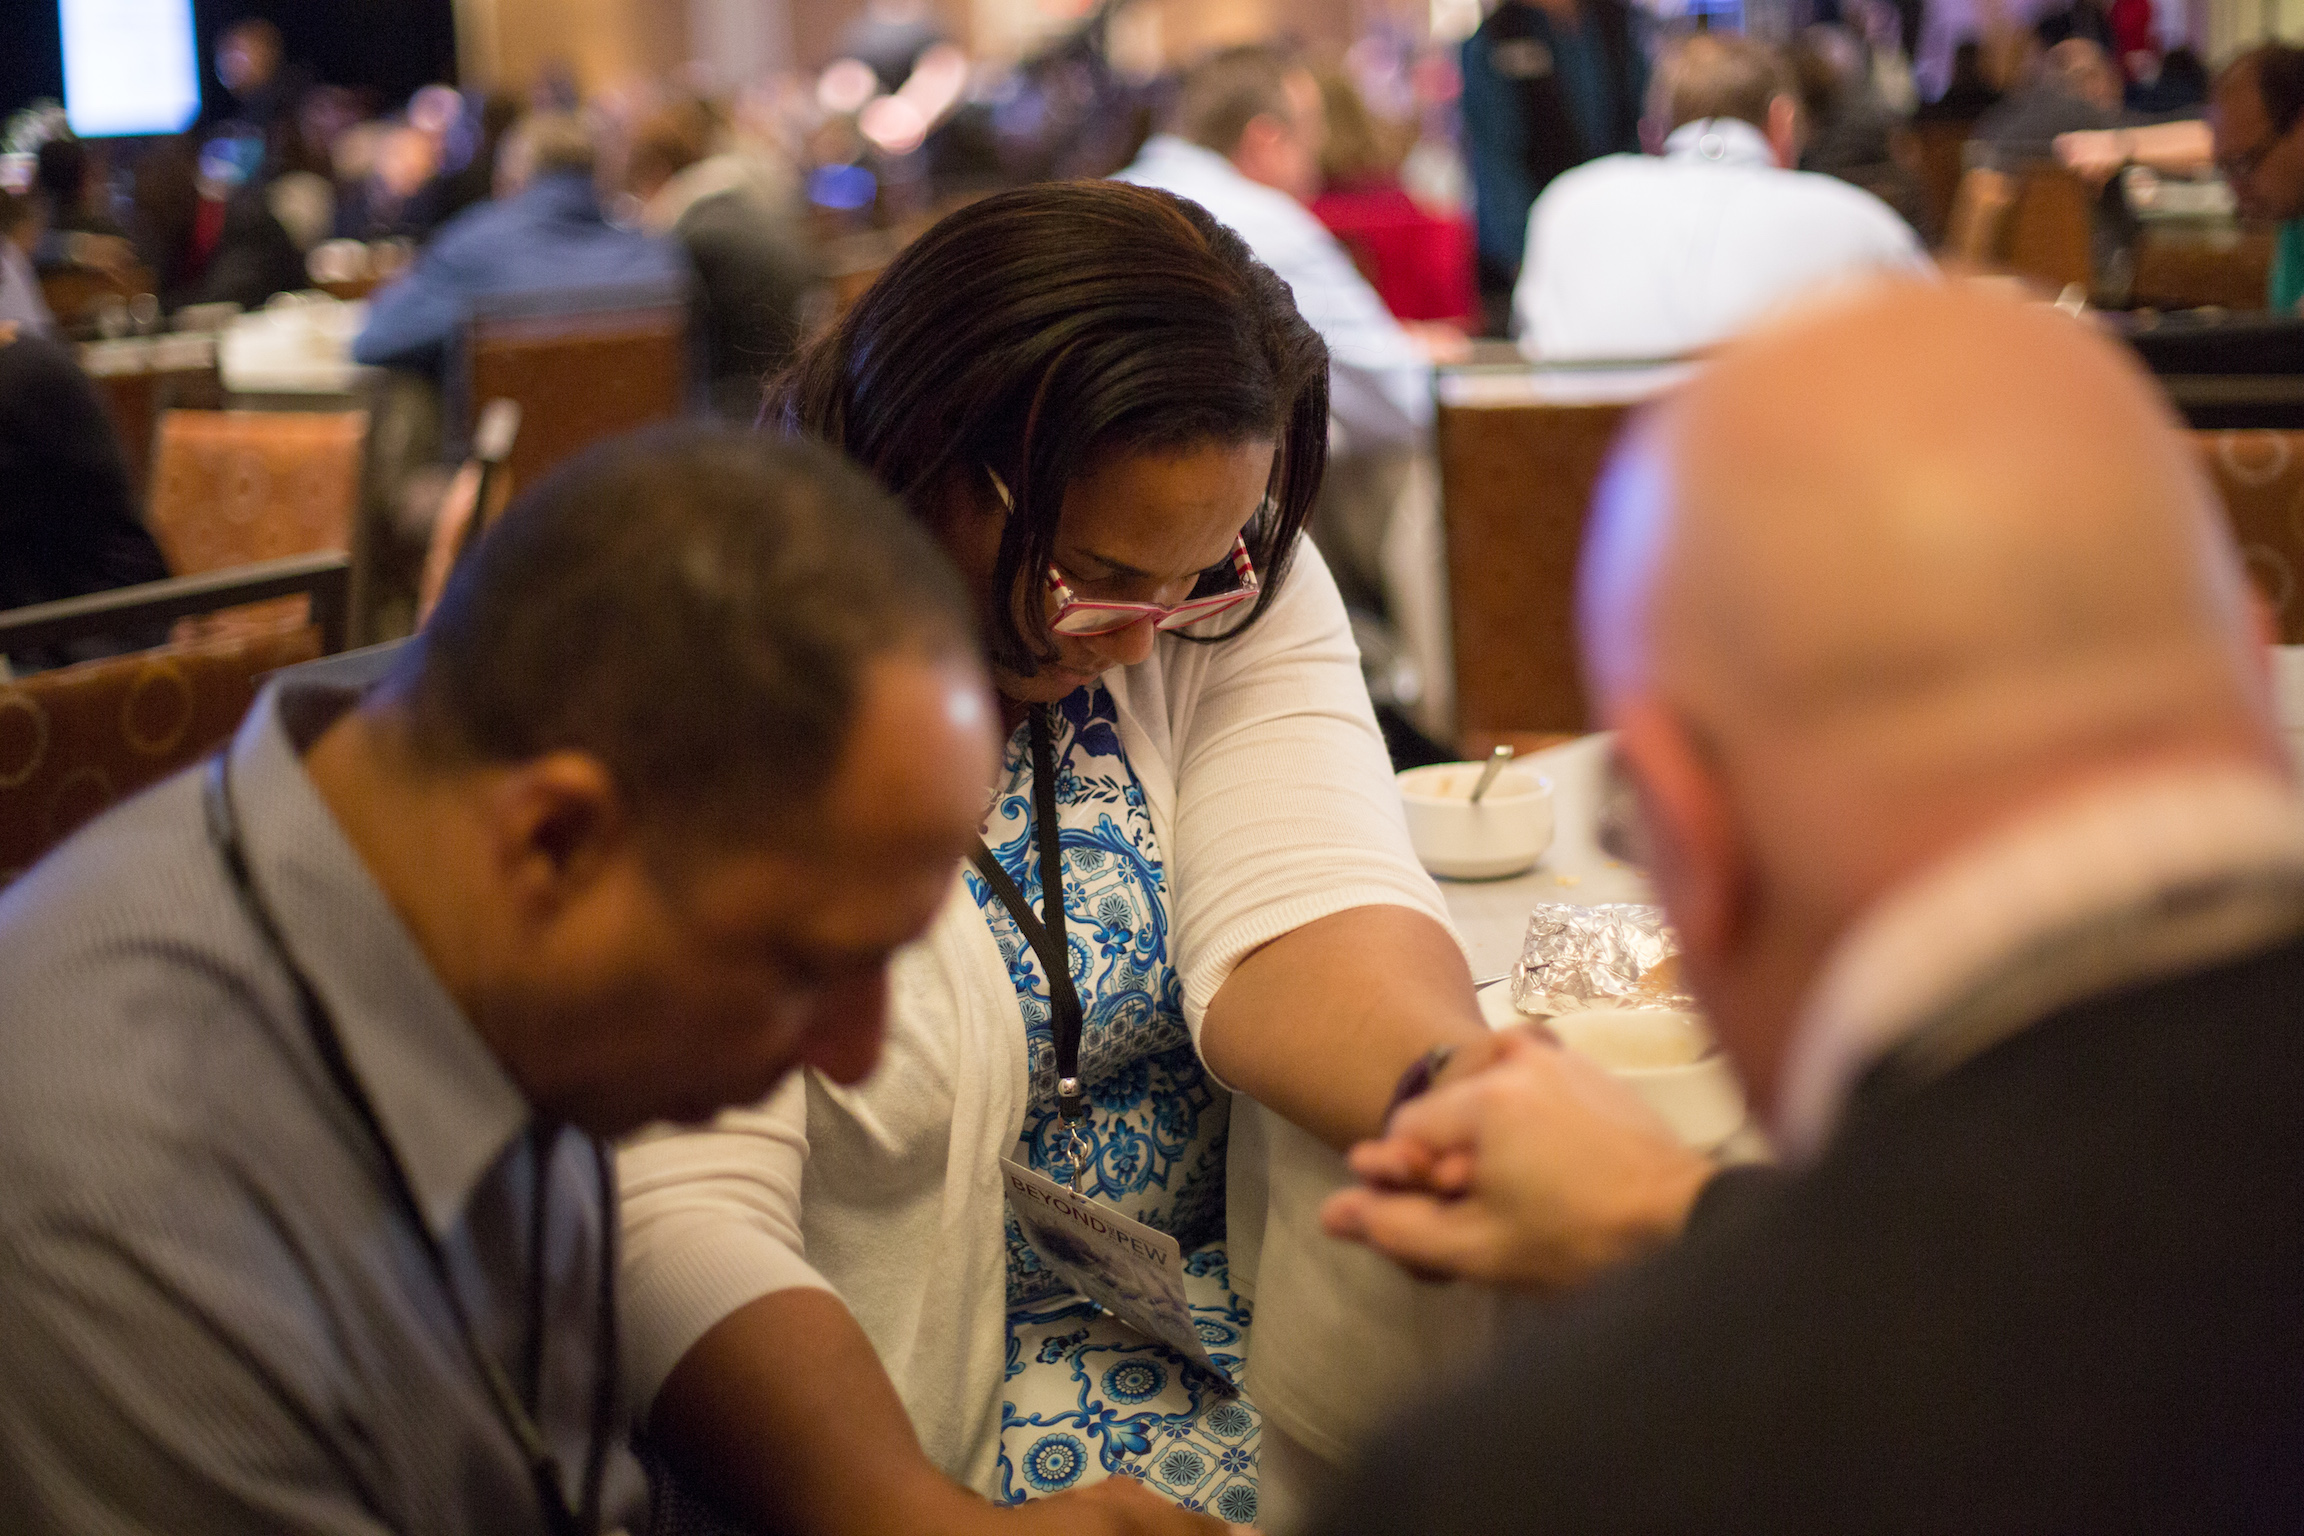 NAD Ministry Leaders Urged to Go Beyond the Pew at the Adventist